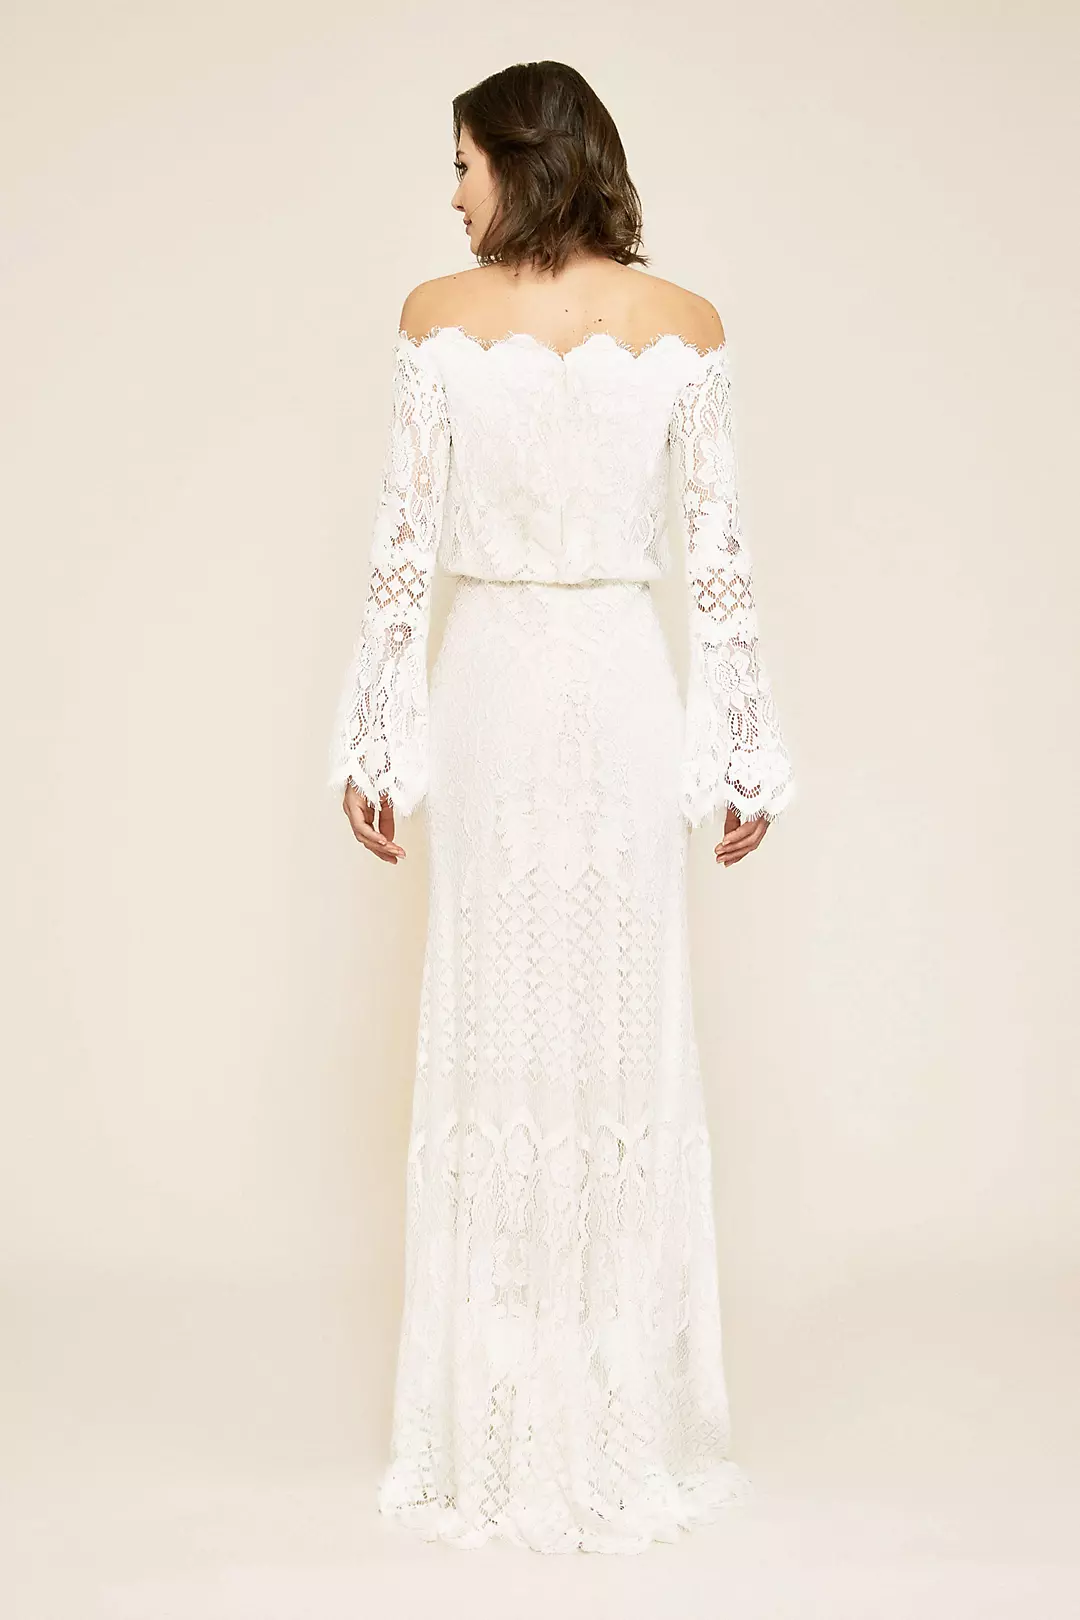 Izumi Off-the-Shoulder Bell Sleeve Wedding Gown Image 2